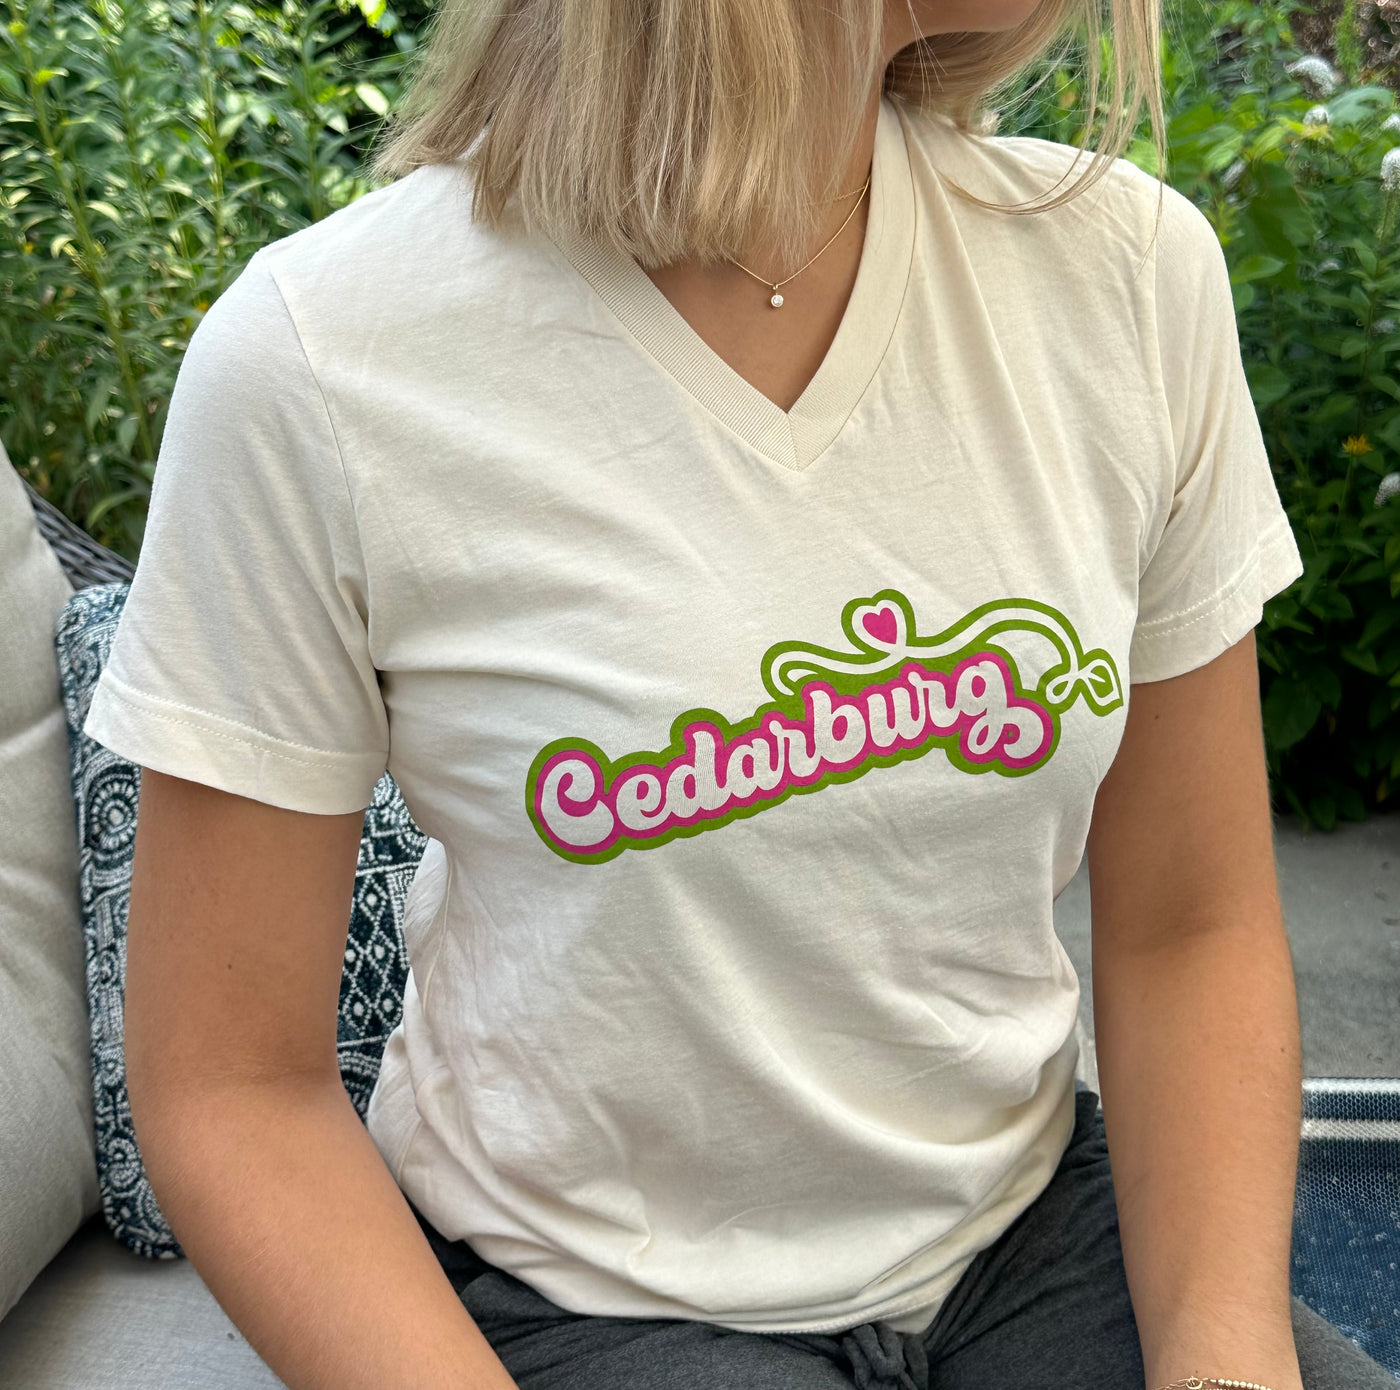 Unisex short sleeve v-neck t-shirt in natural color with Green and pink Cedarburg heart design